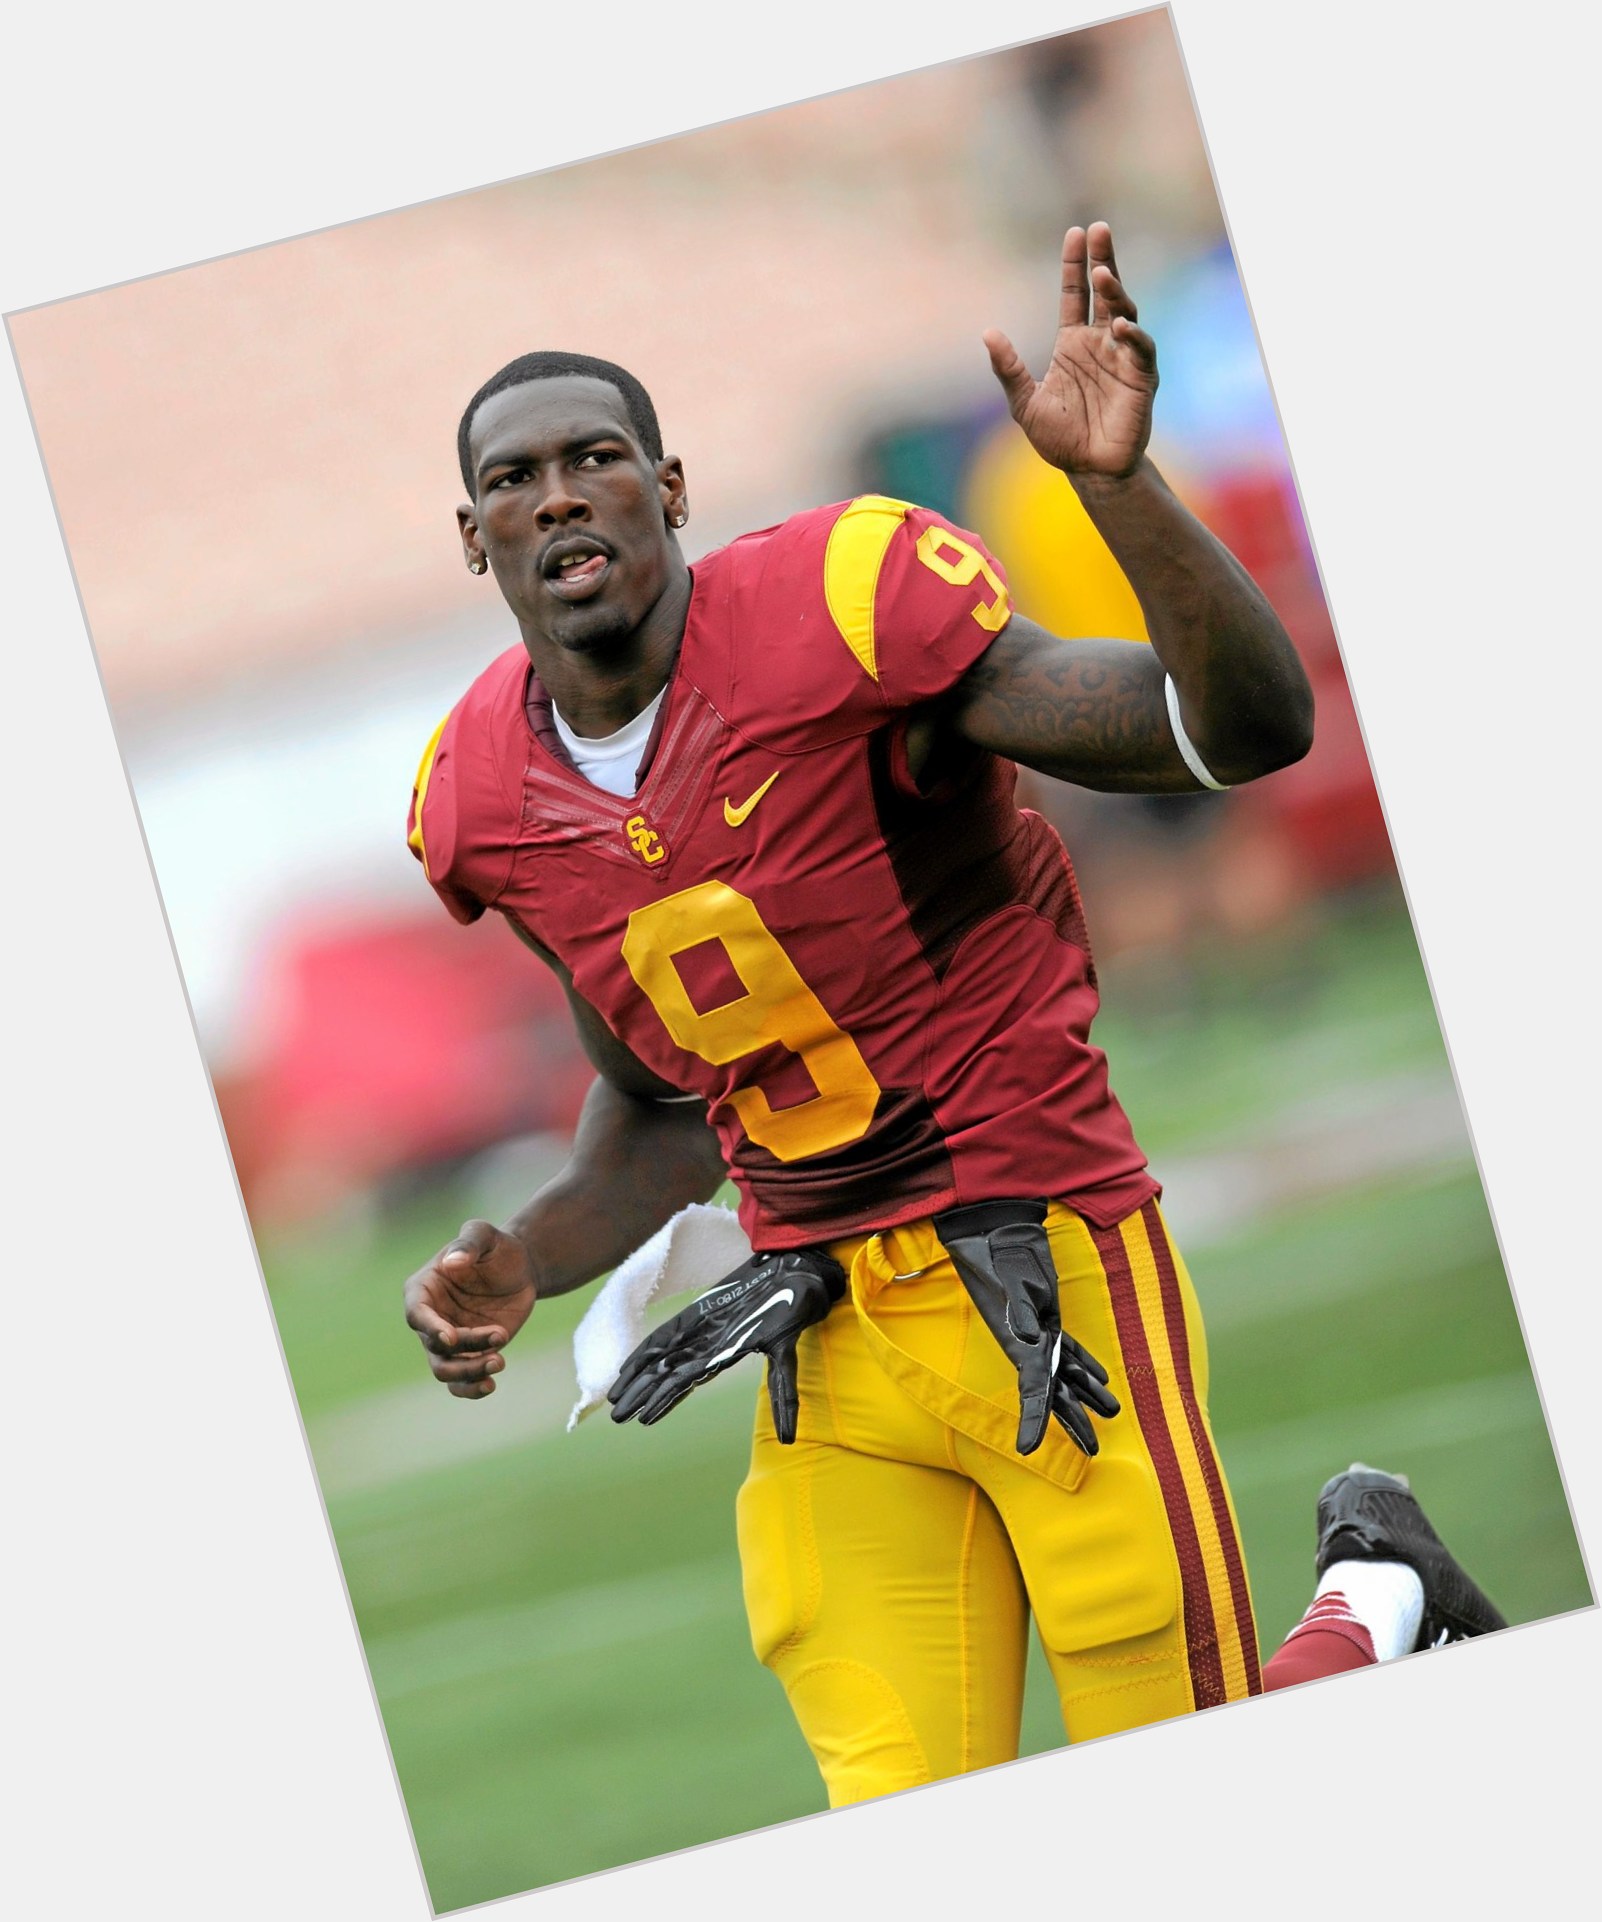 Marqise Lee birthday 2015